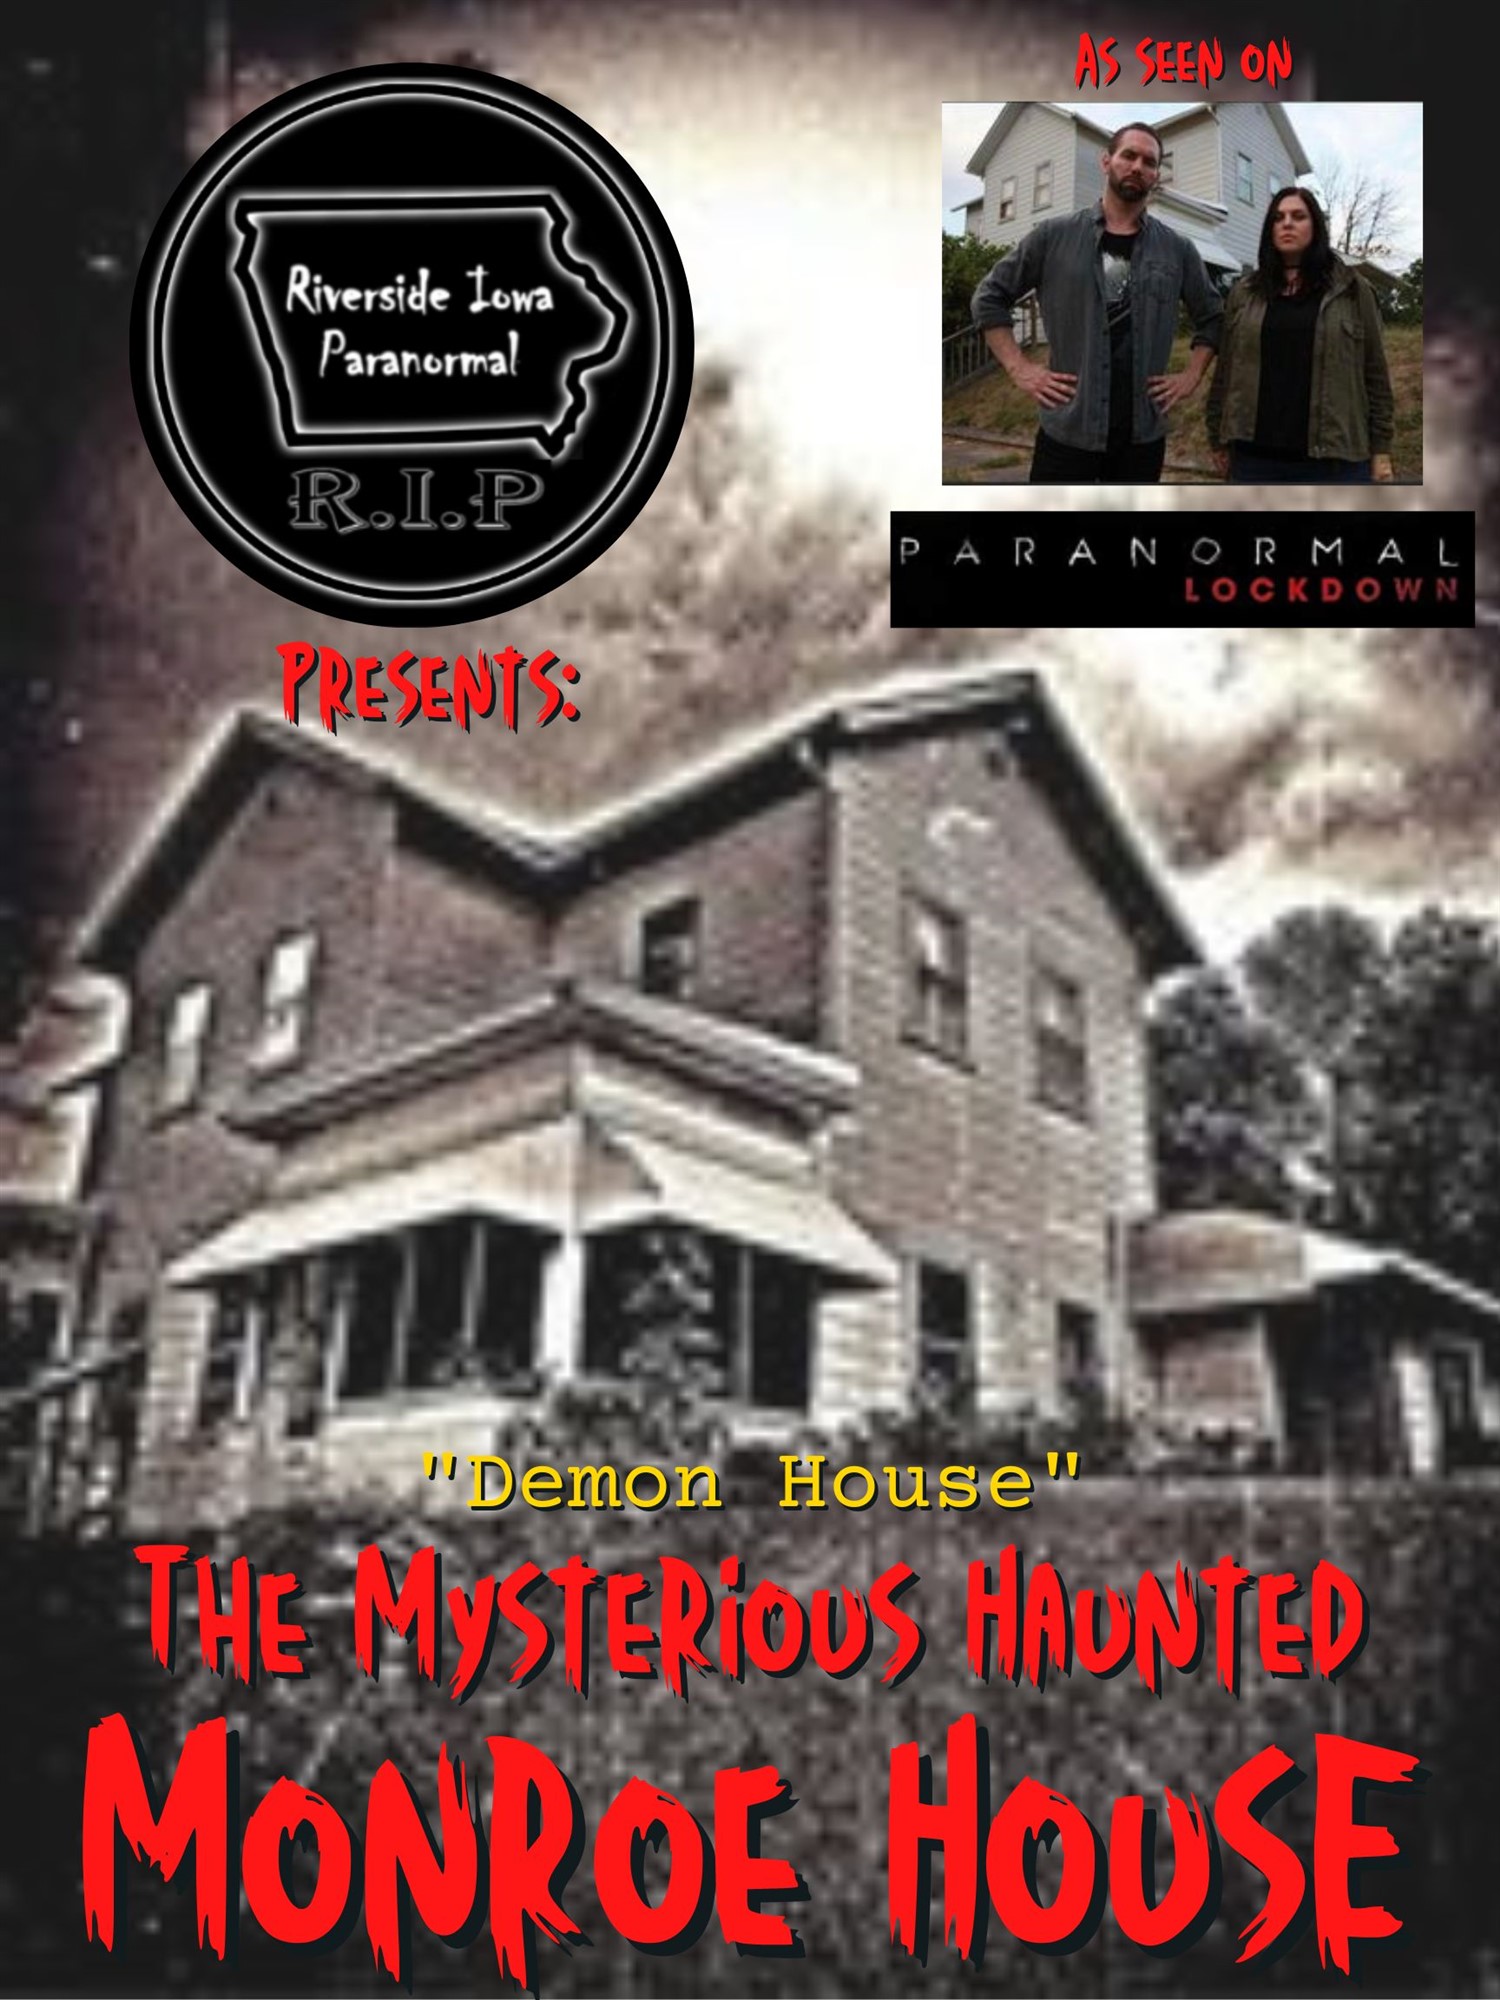 Mysterious Haunted Monroe House  on Mar 04, 20:00@Mysterious Monroe House - Buy tickets and Get information on Thriller Events thriller.events